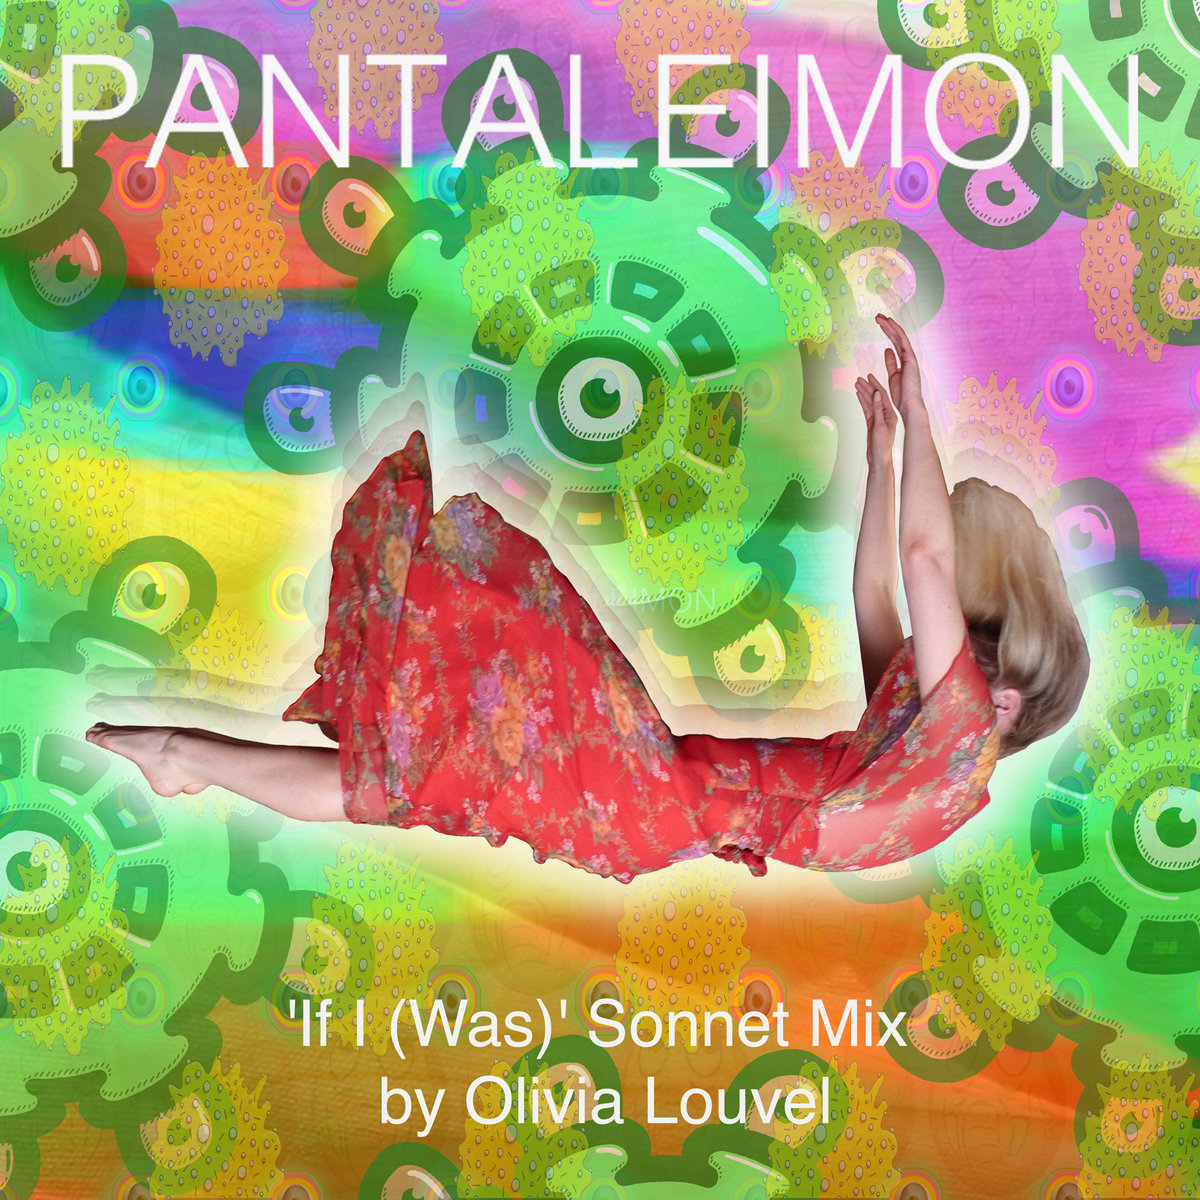 If I (Was)' Sonnet Mix by Olivia Louvel | Pantaleimon